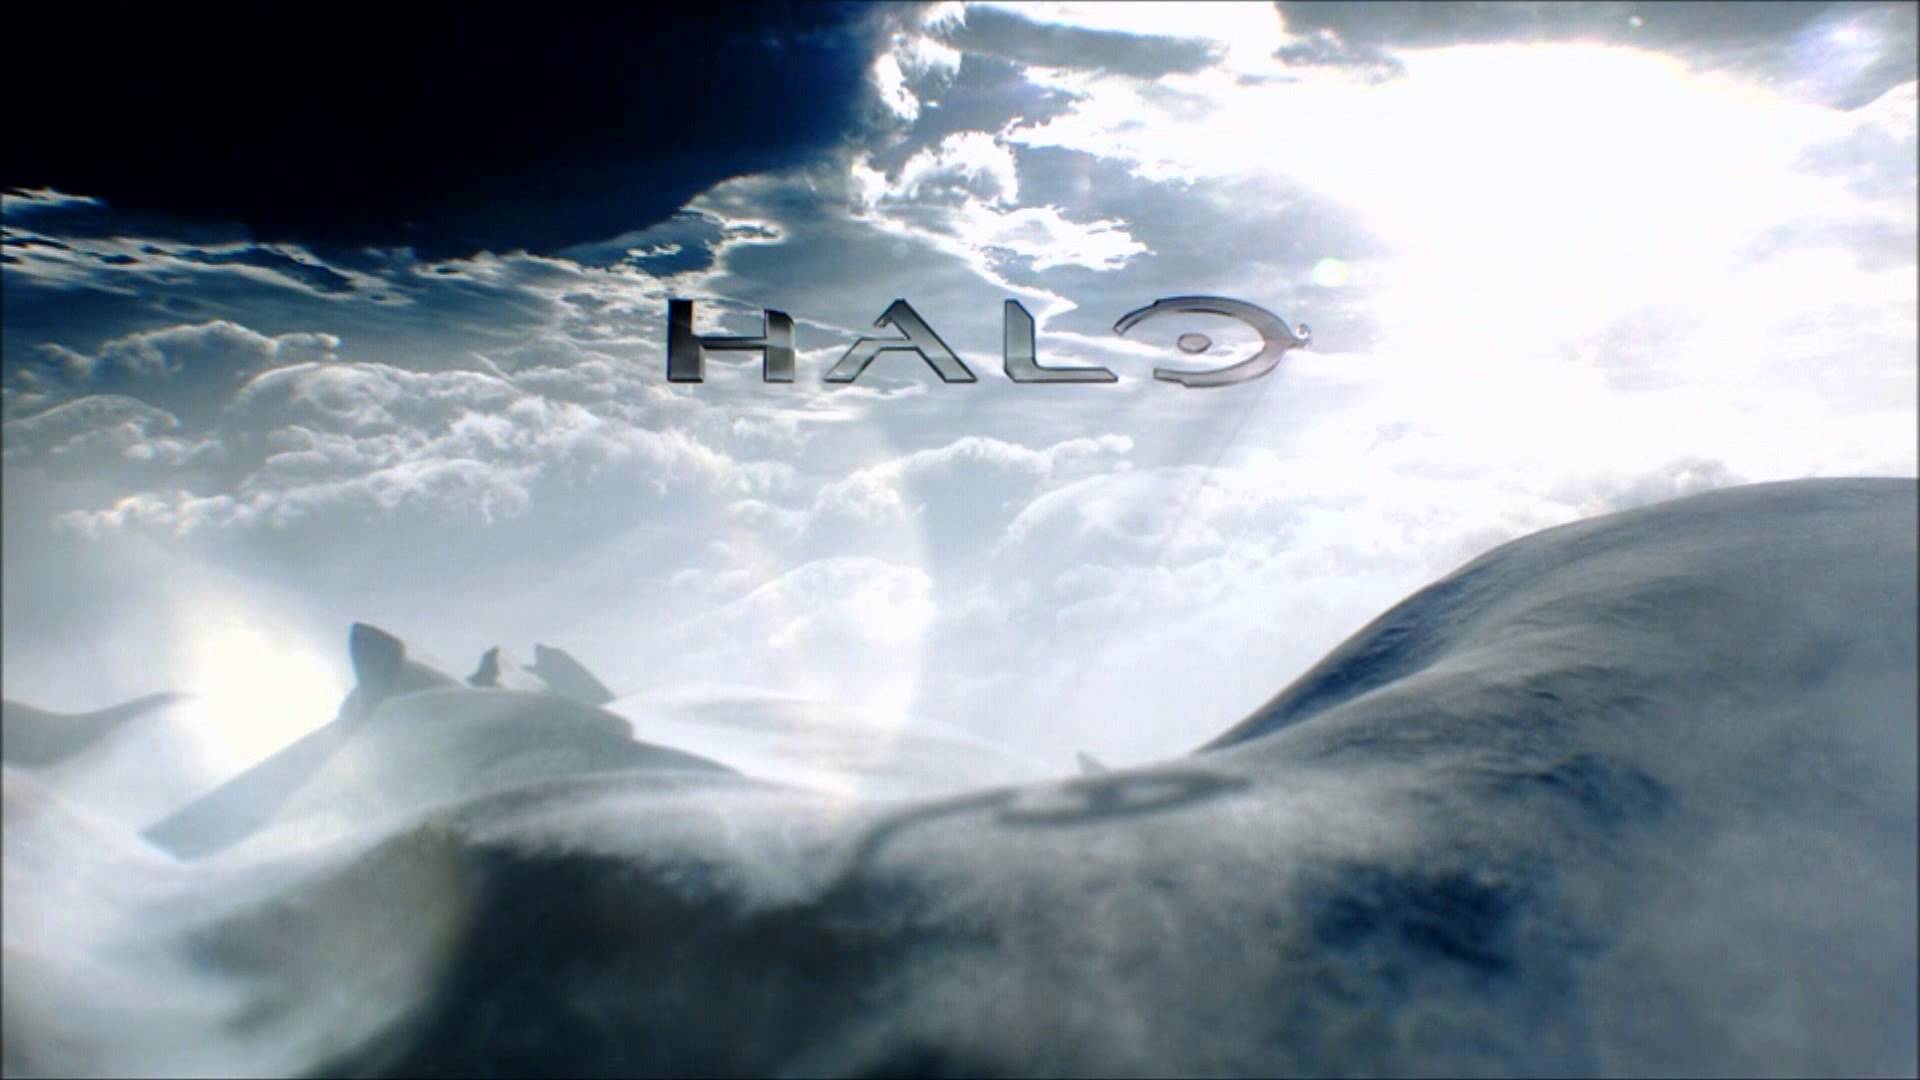 Halo 5 Teaser Trailer Xbox One - With reactions - YouTube